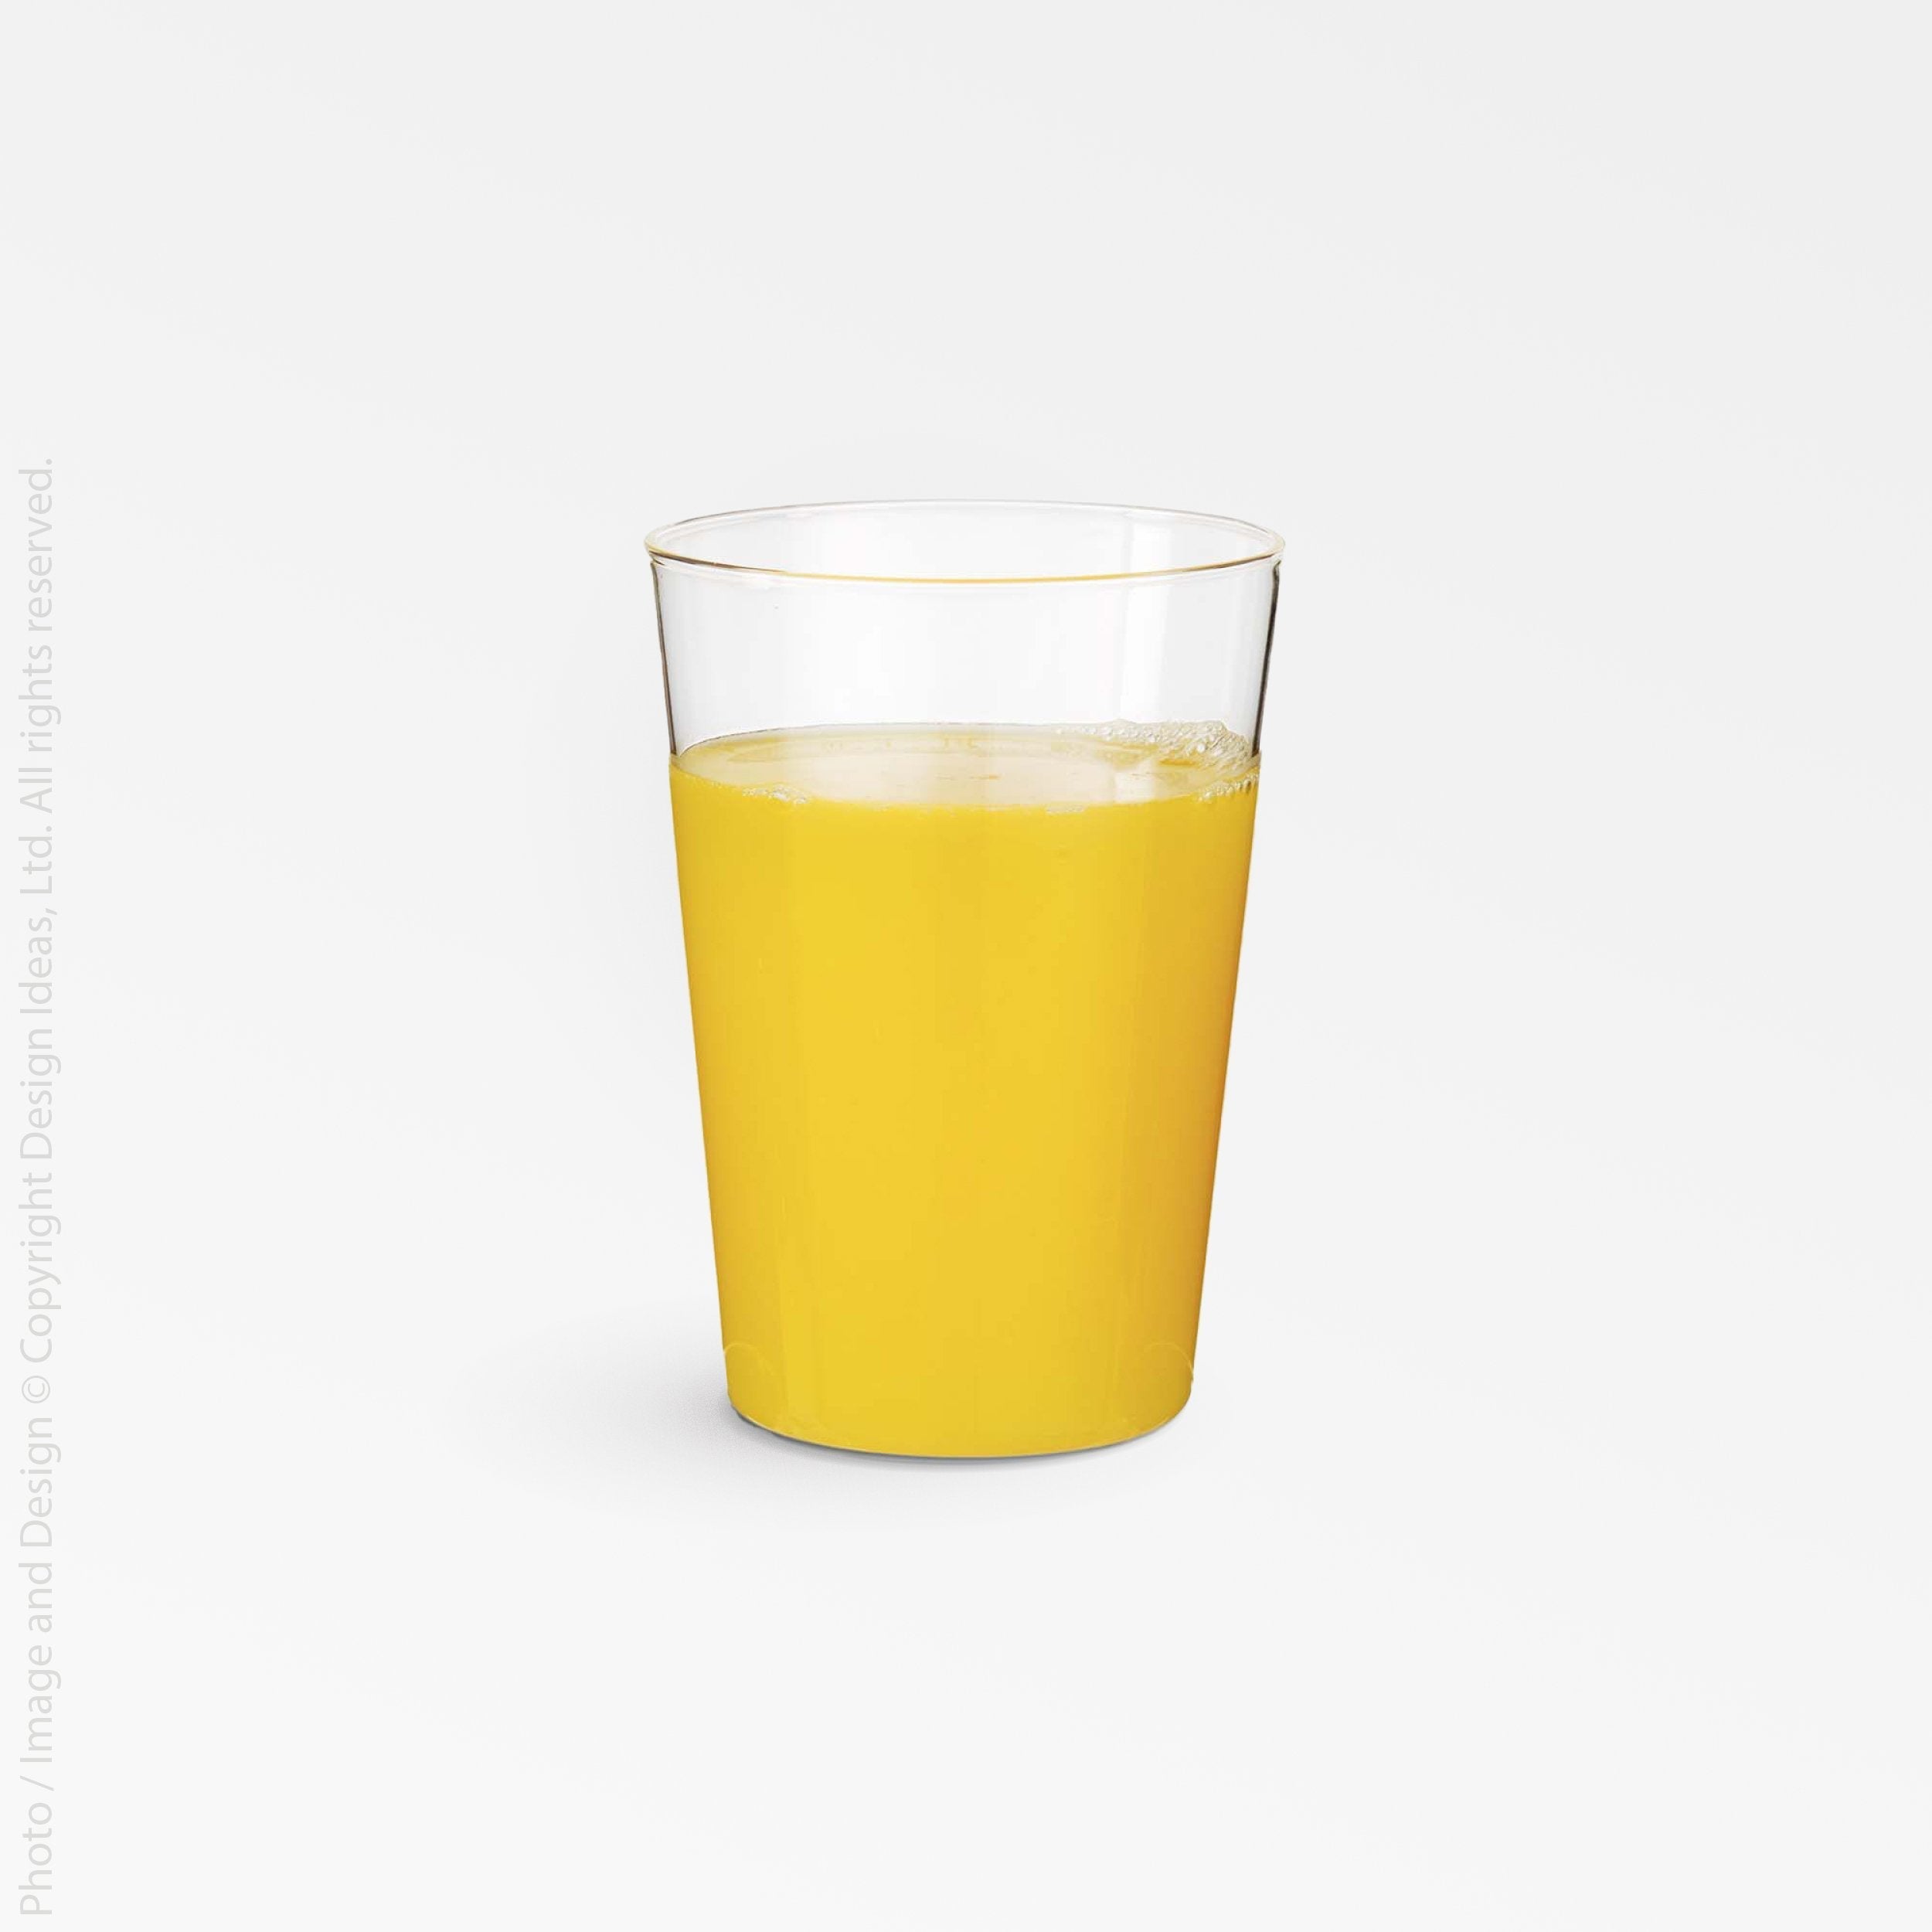 ITI Juice Glass: Lexington, 8 1/2 oz Capacity, Clear, Glass, 4 5/8 in  Overall Ht, 2 1/2 in Dia